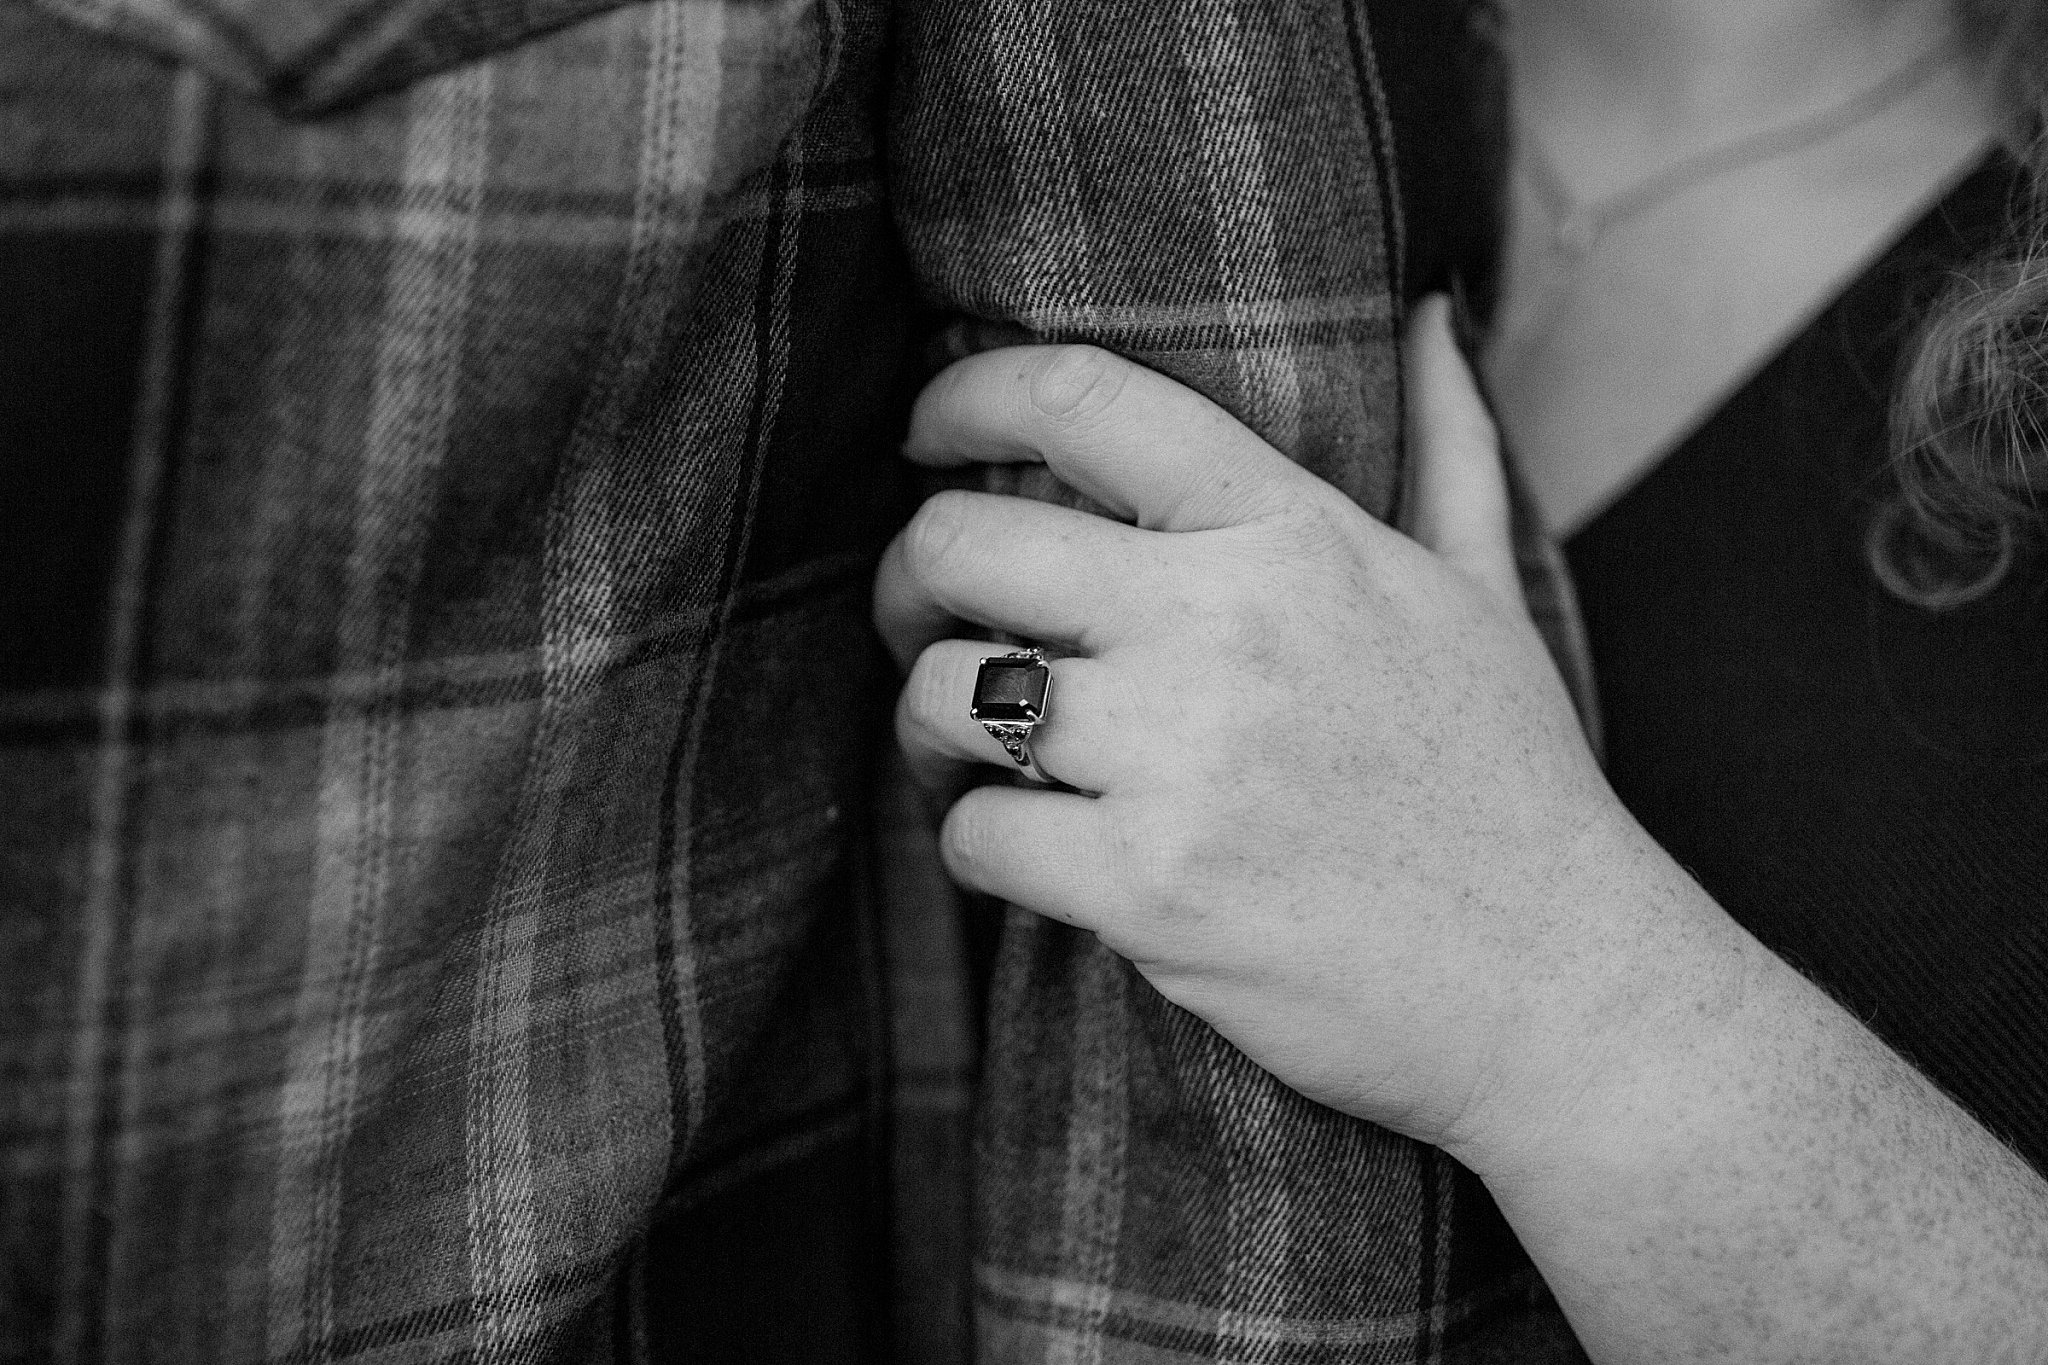  Hand shows off ring as it holds arm at Halloween engagement session 